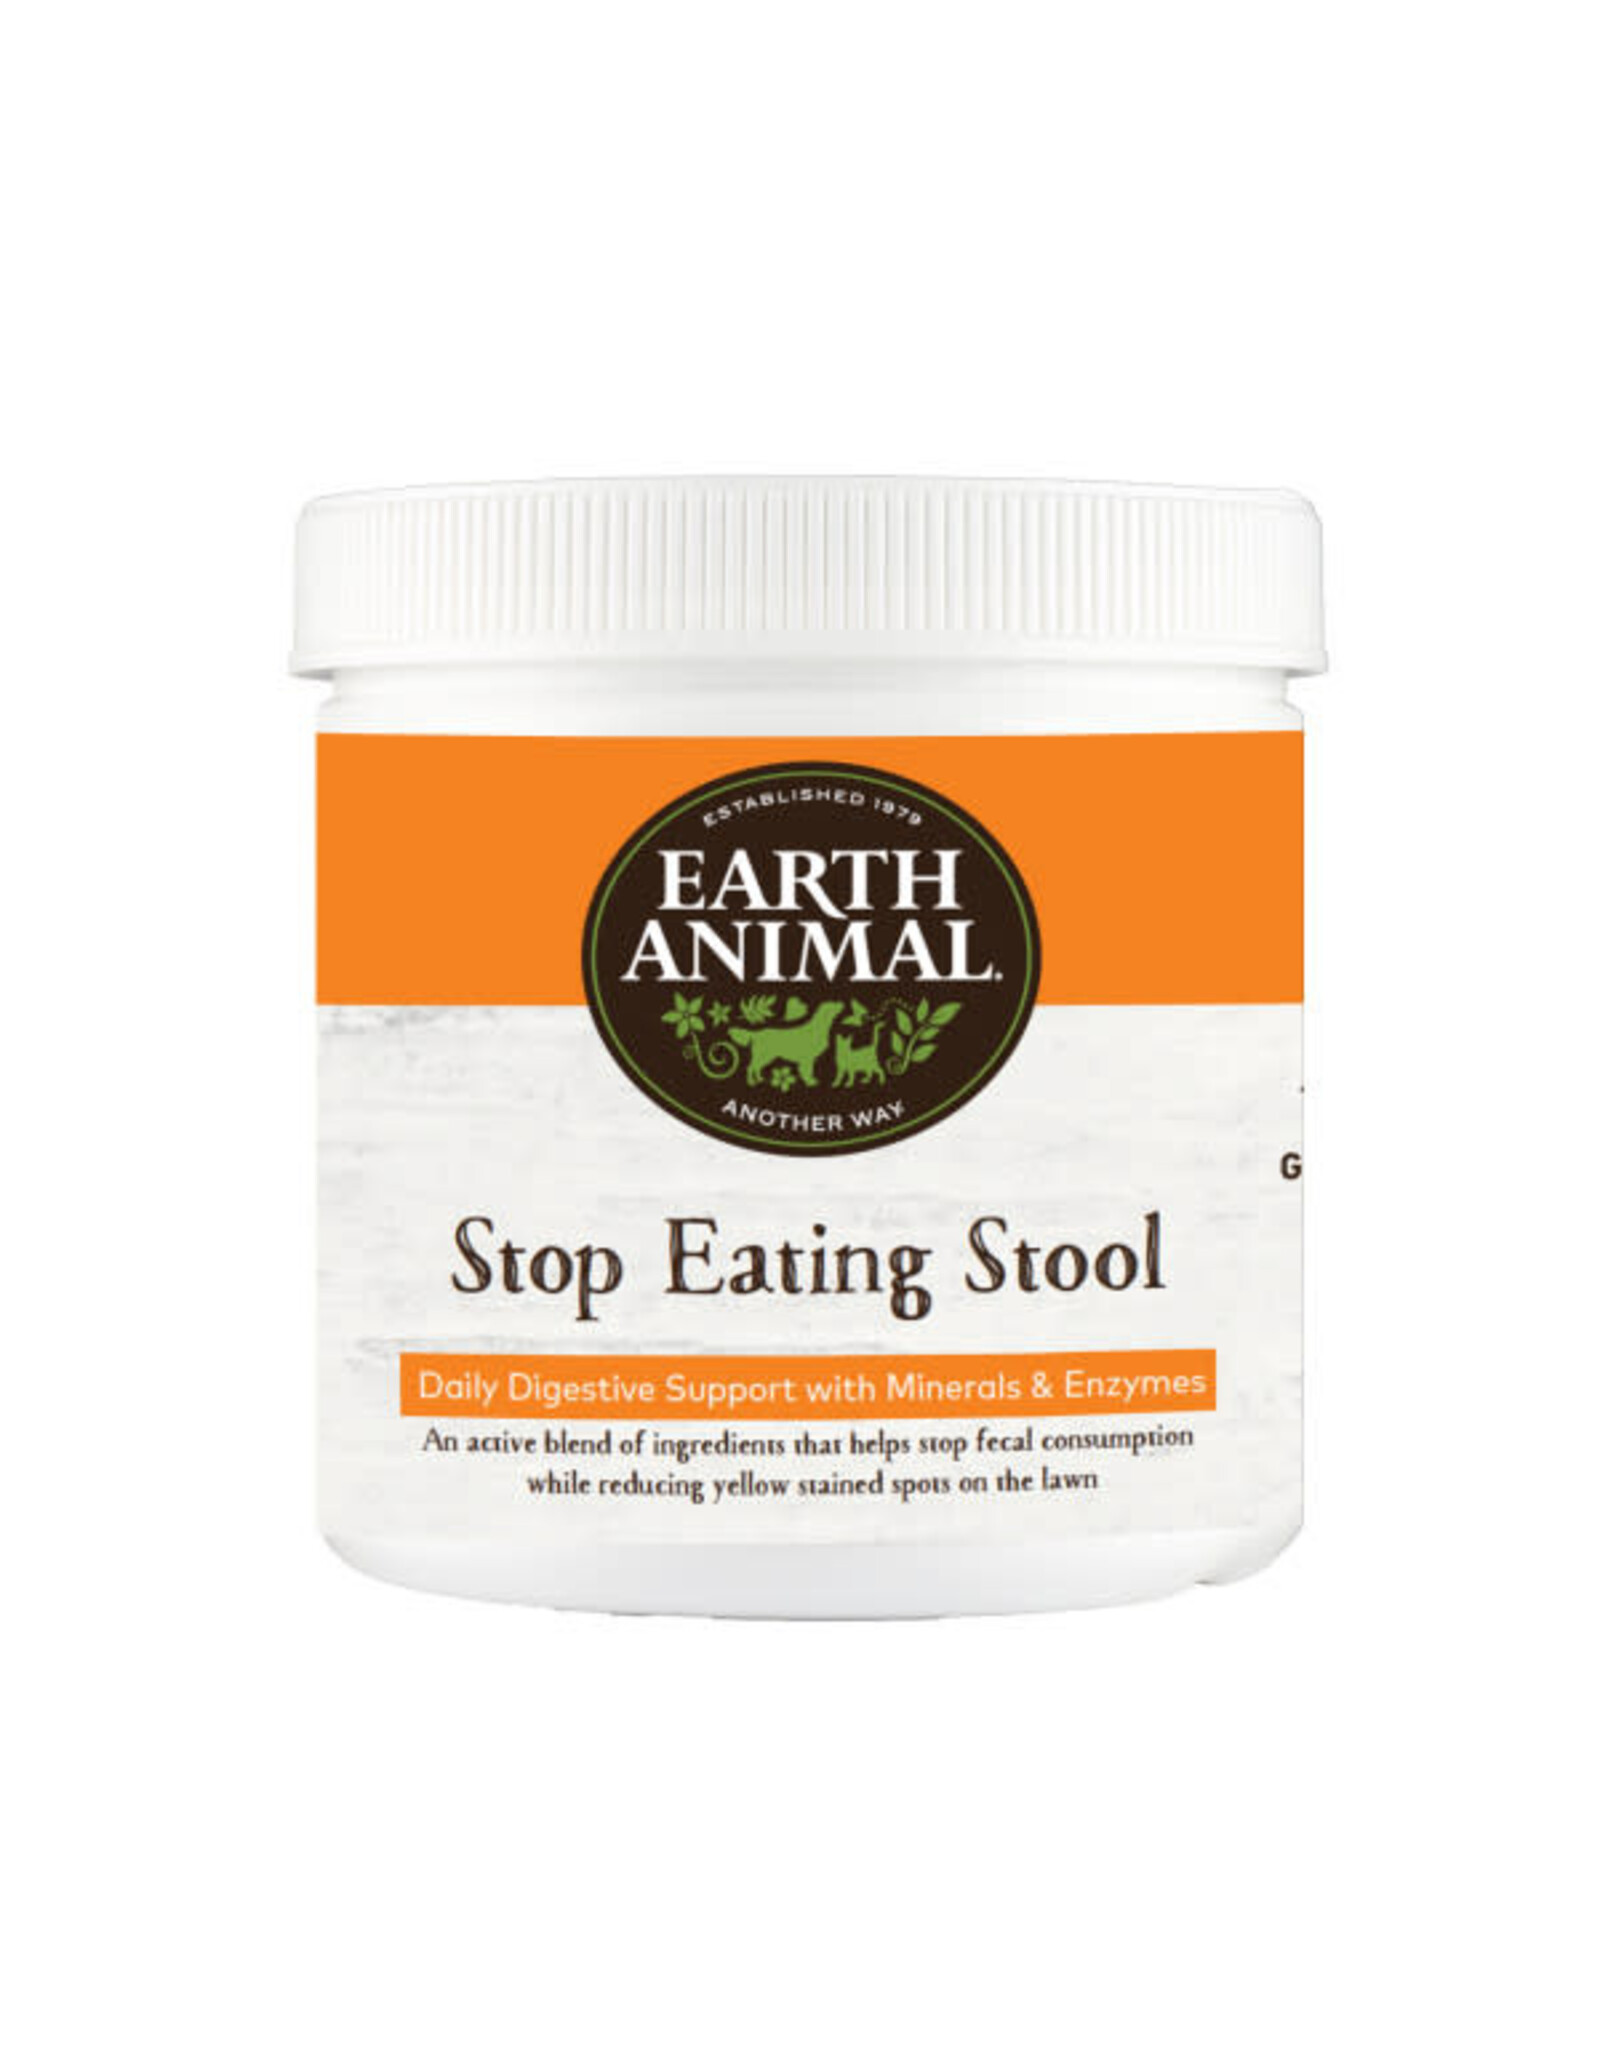 Earth Animal EARTH ANIMAL STOP EATING STOOL DAILY DIGESTIVE SUPPORT 8OZ